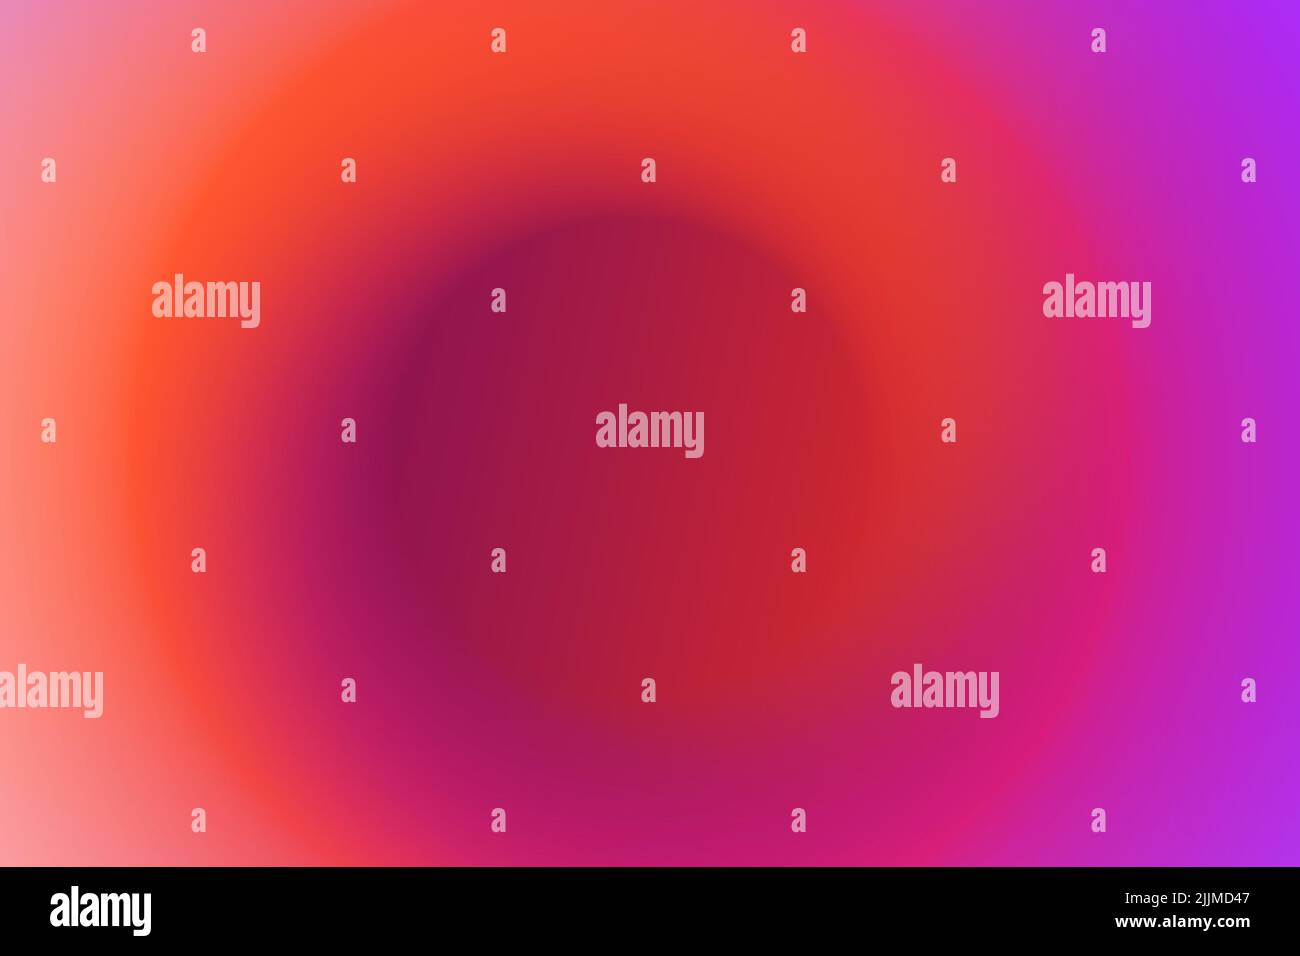 Smooth circular pink and orange gradient mess background Stock Photo